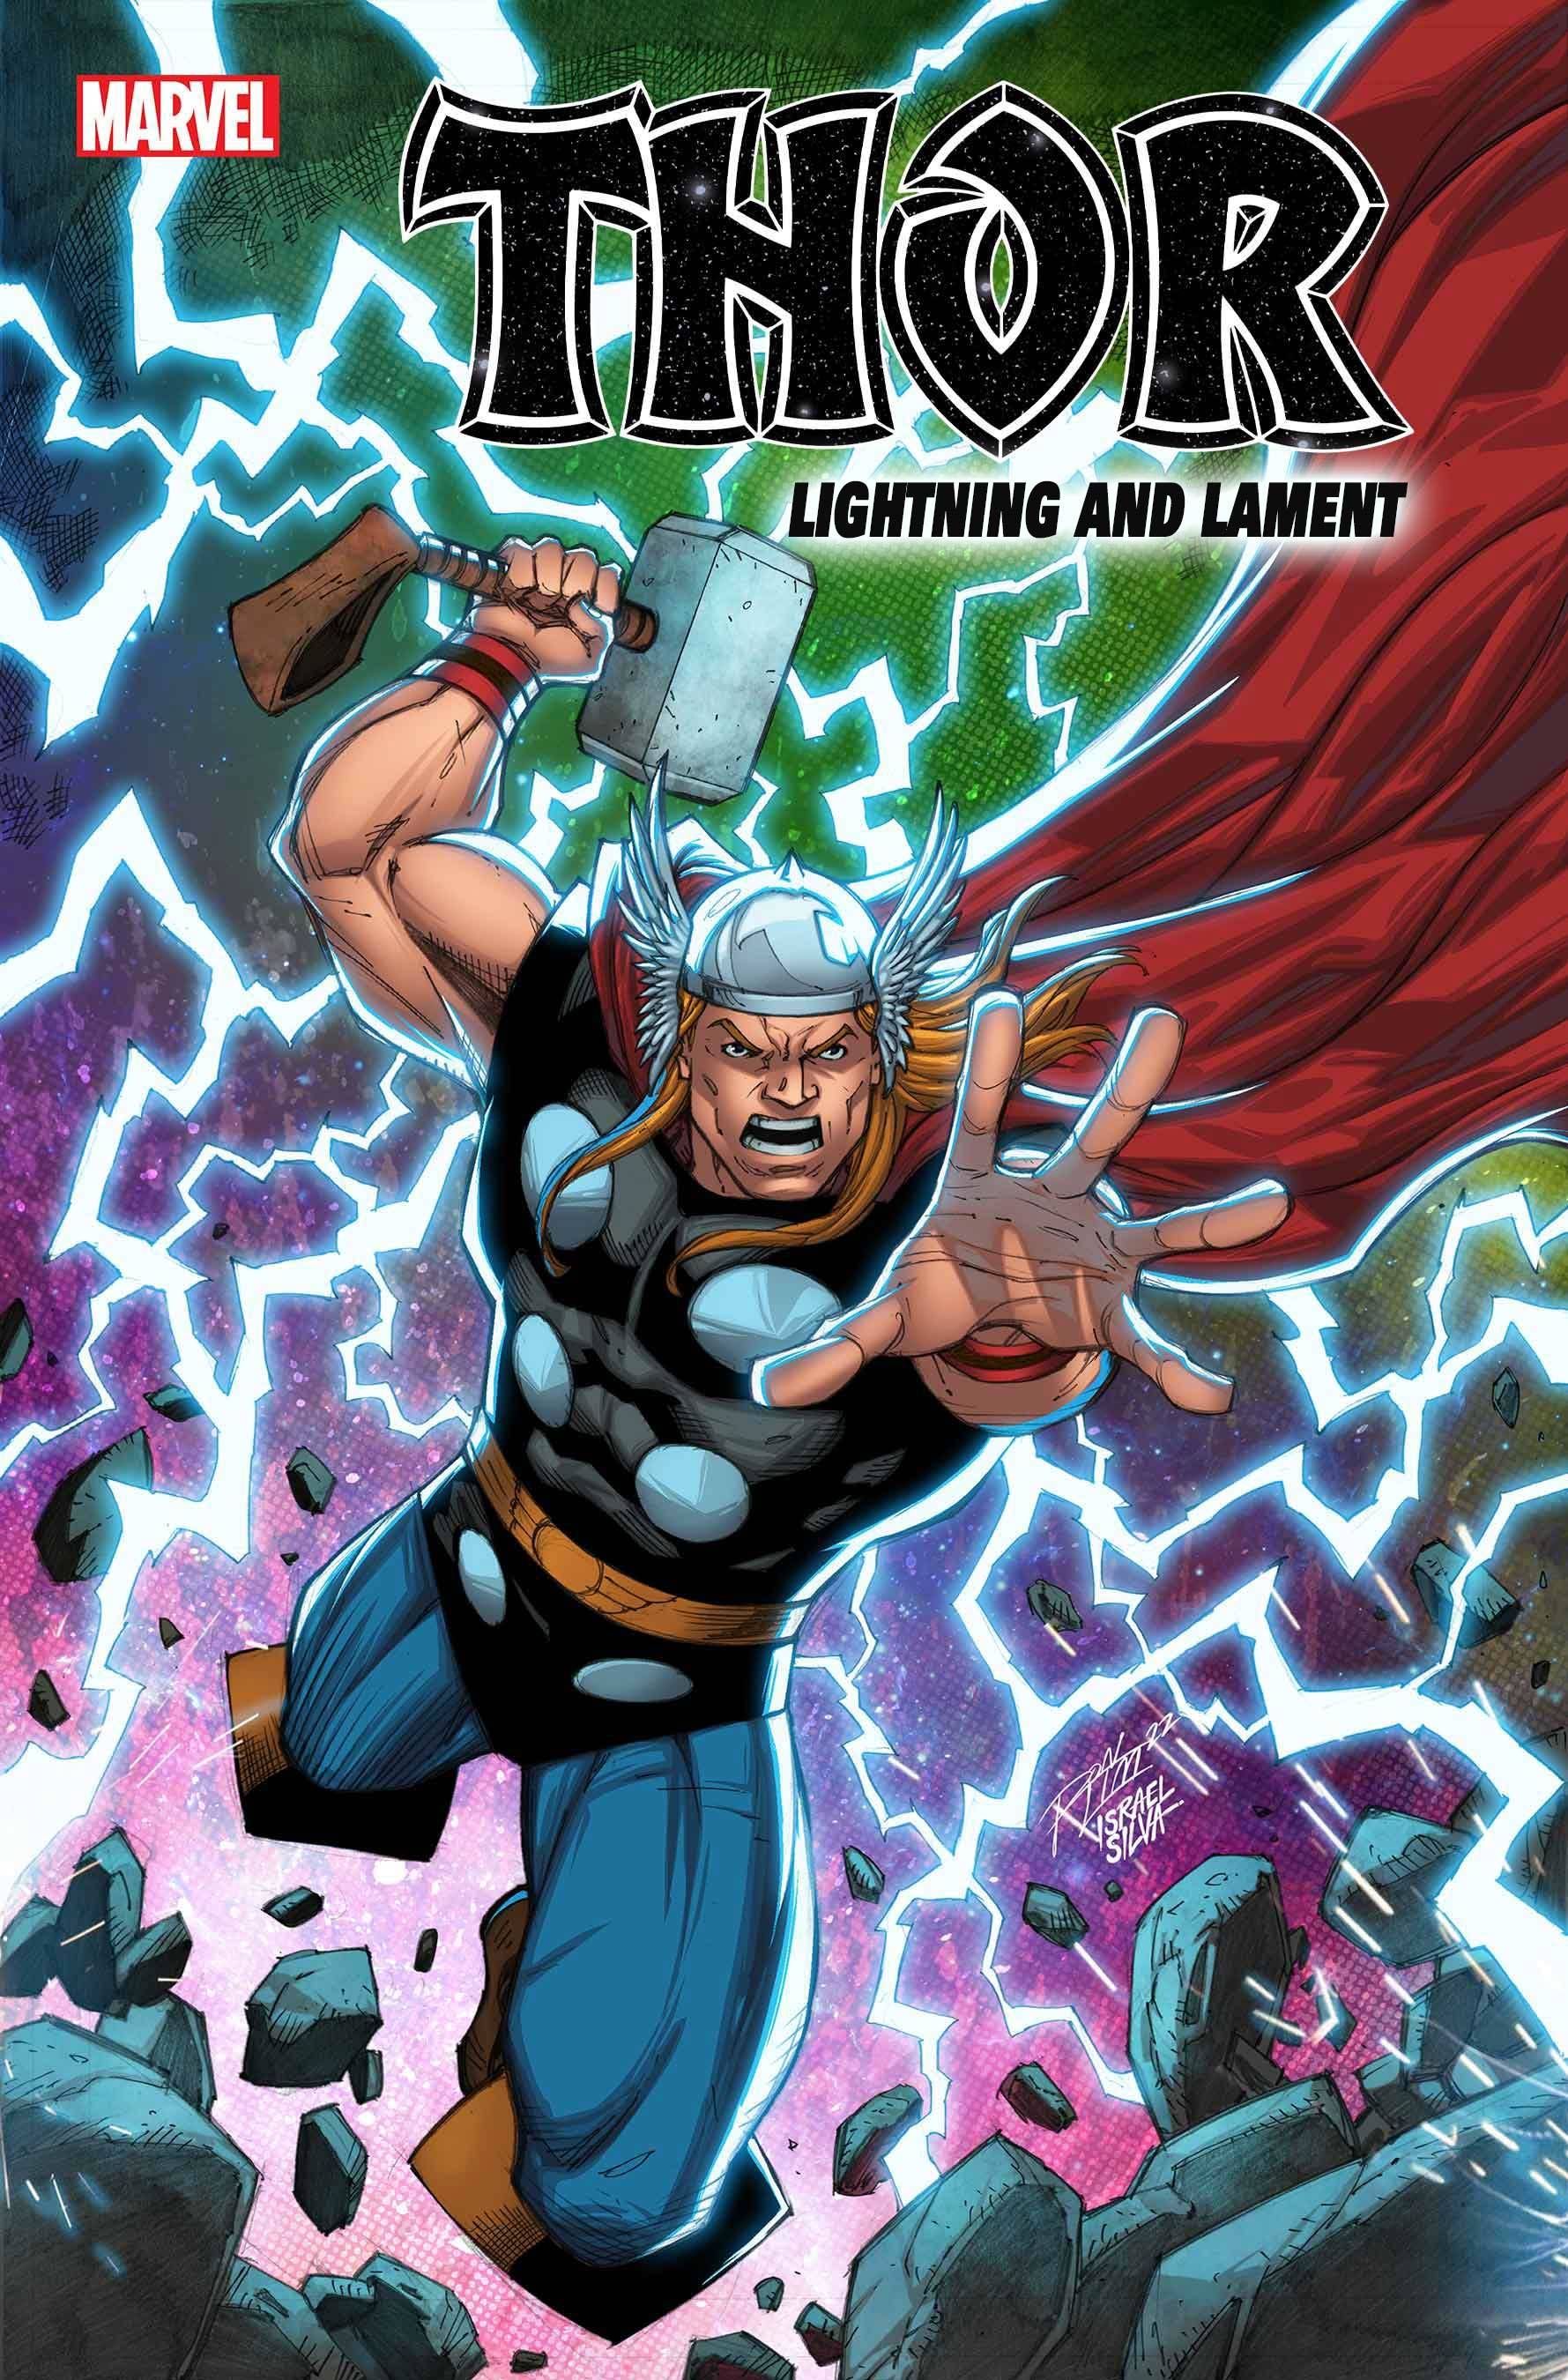 Thor Lightning and Lament #1 cover